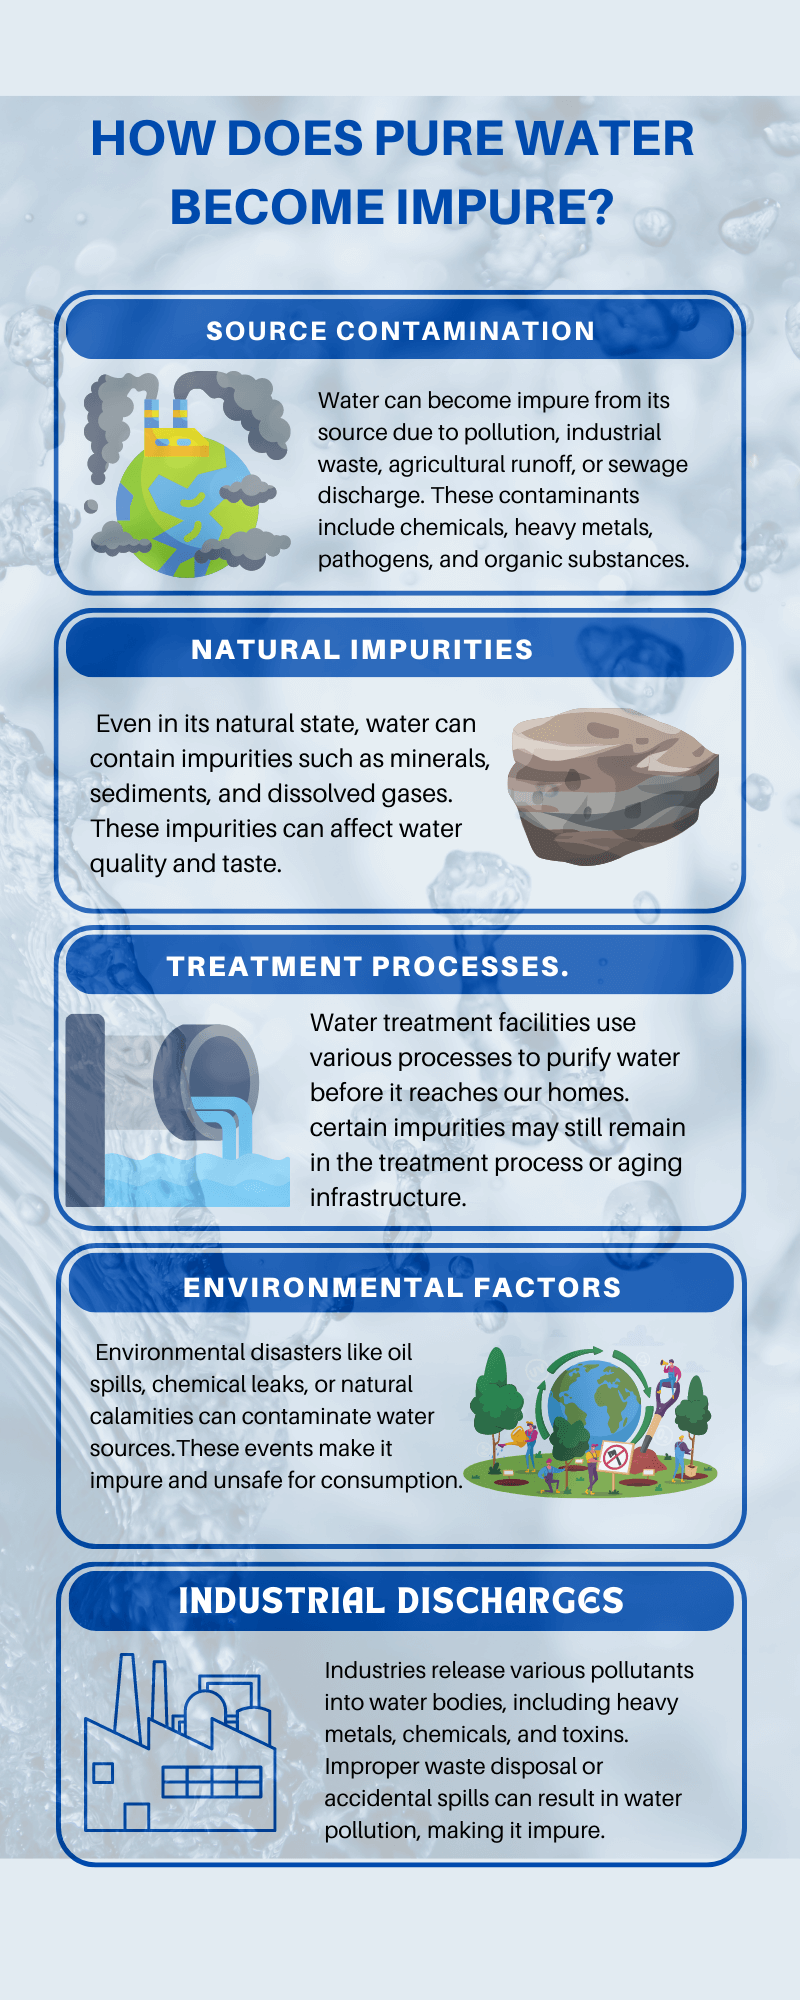 How Does Pure Water Become Impure - infographic